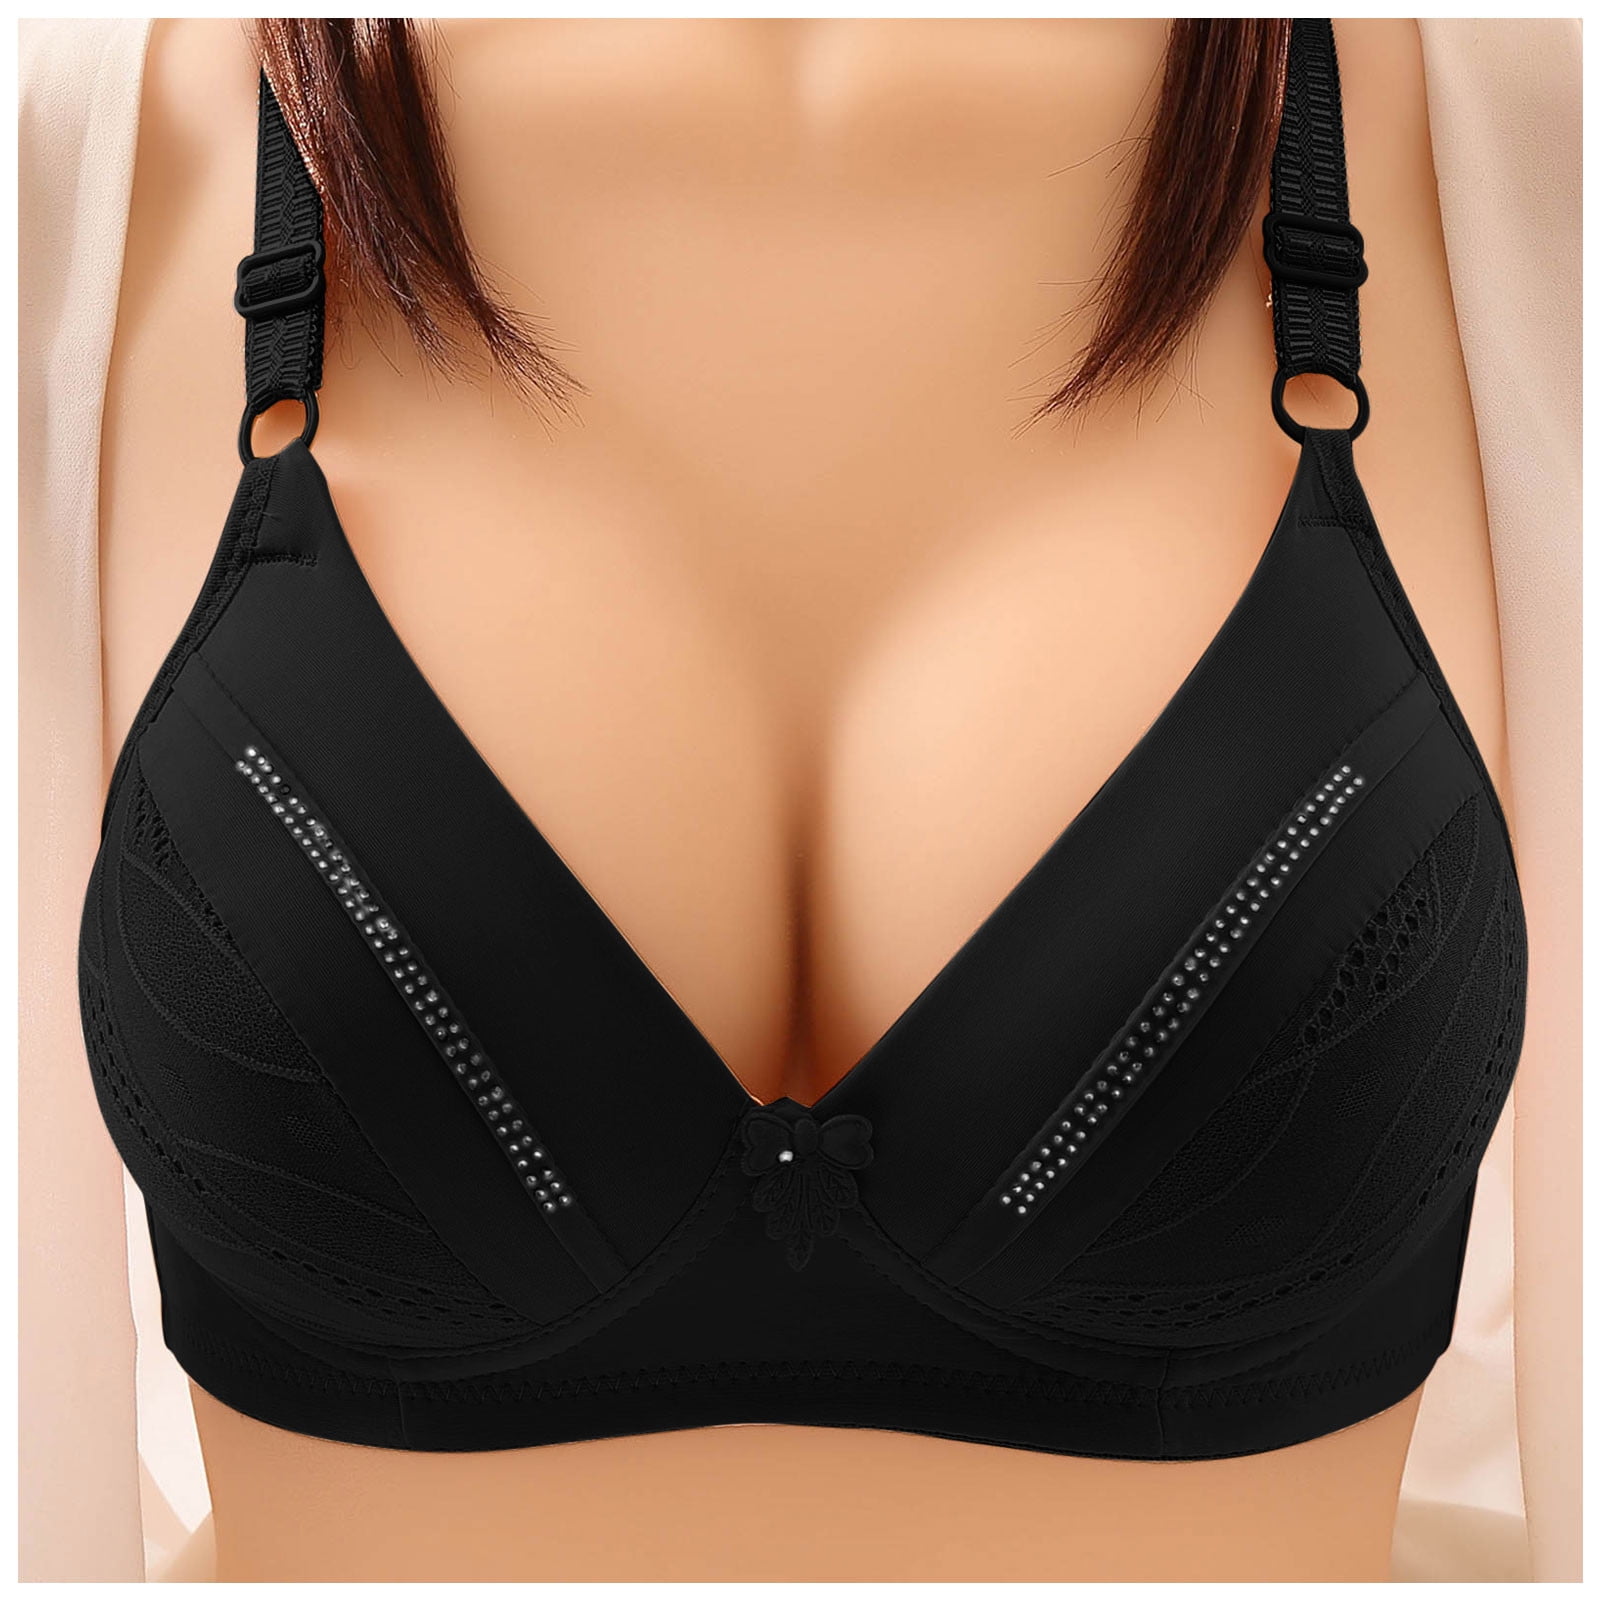 adviicd Sports Bras for Women High Support Large Bust Women's